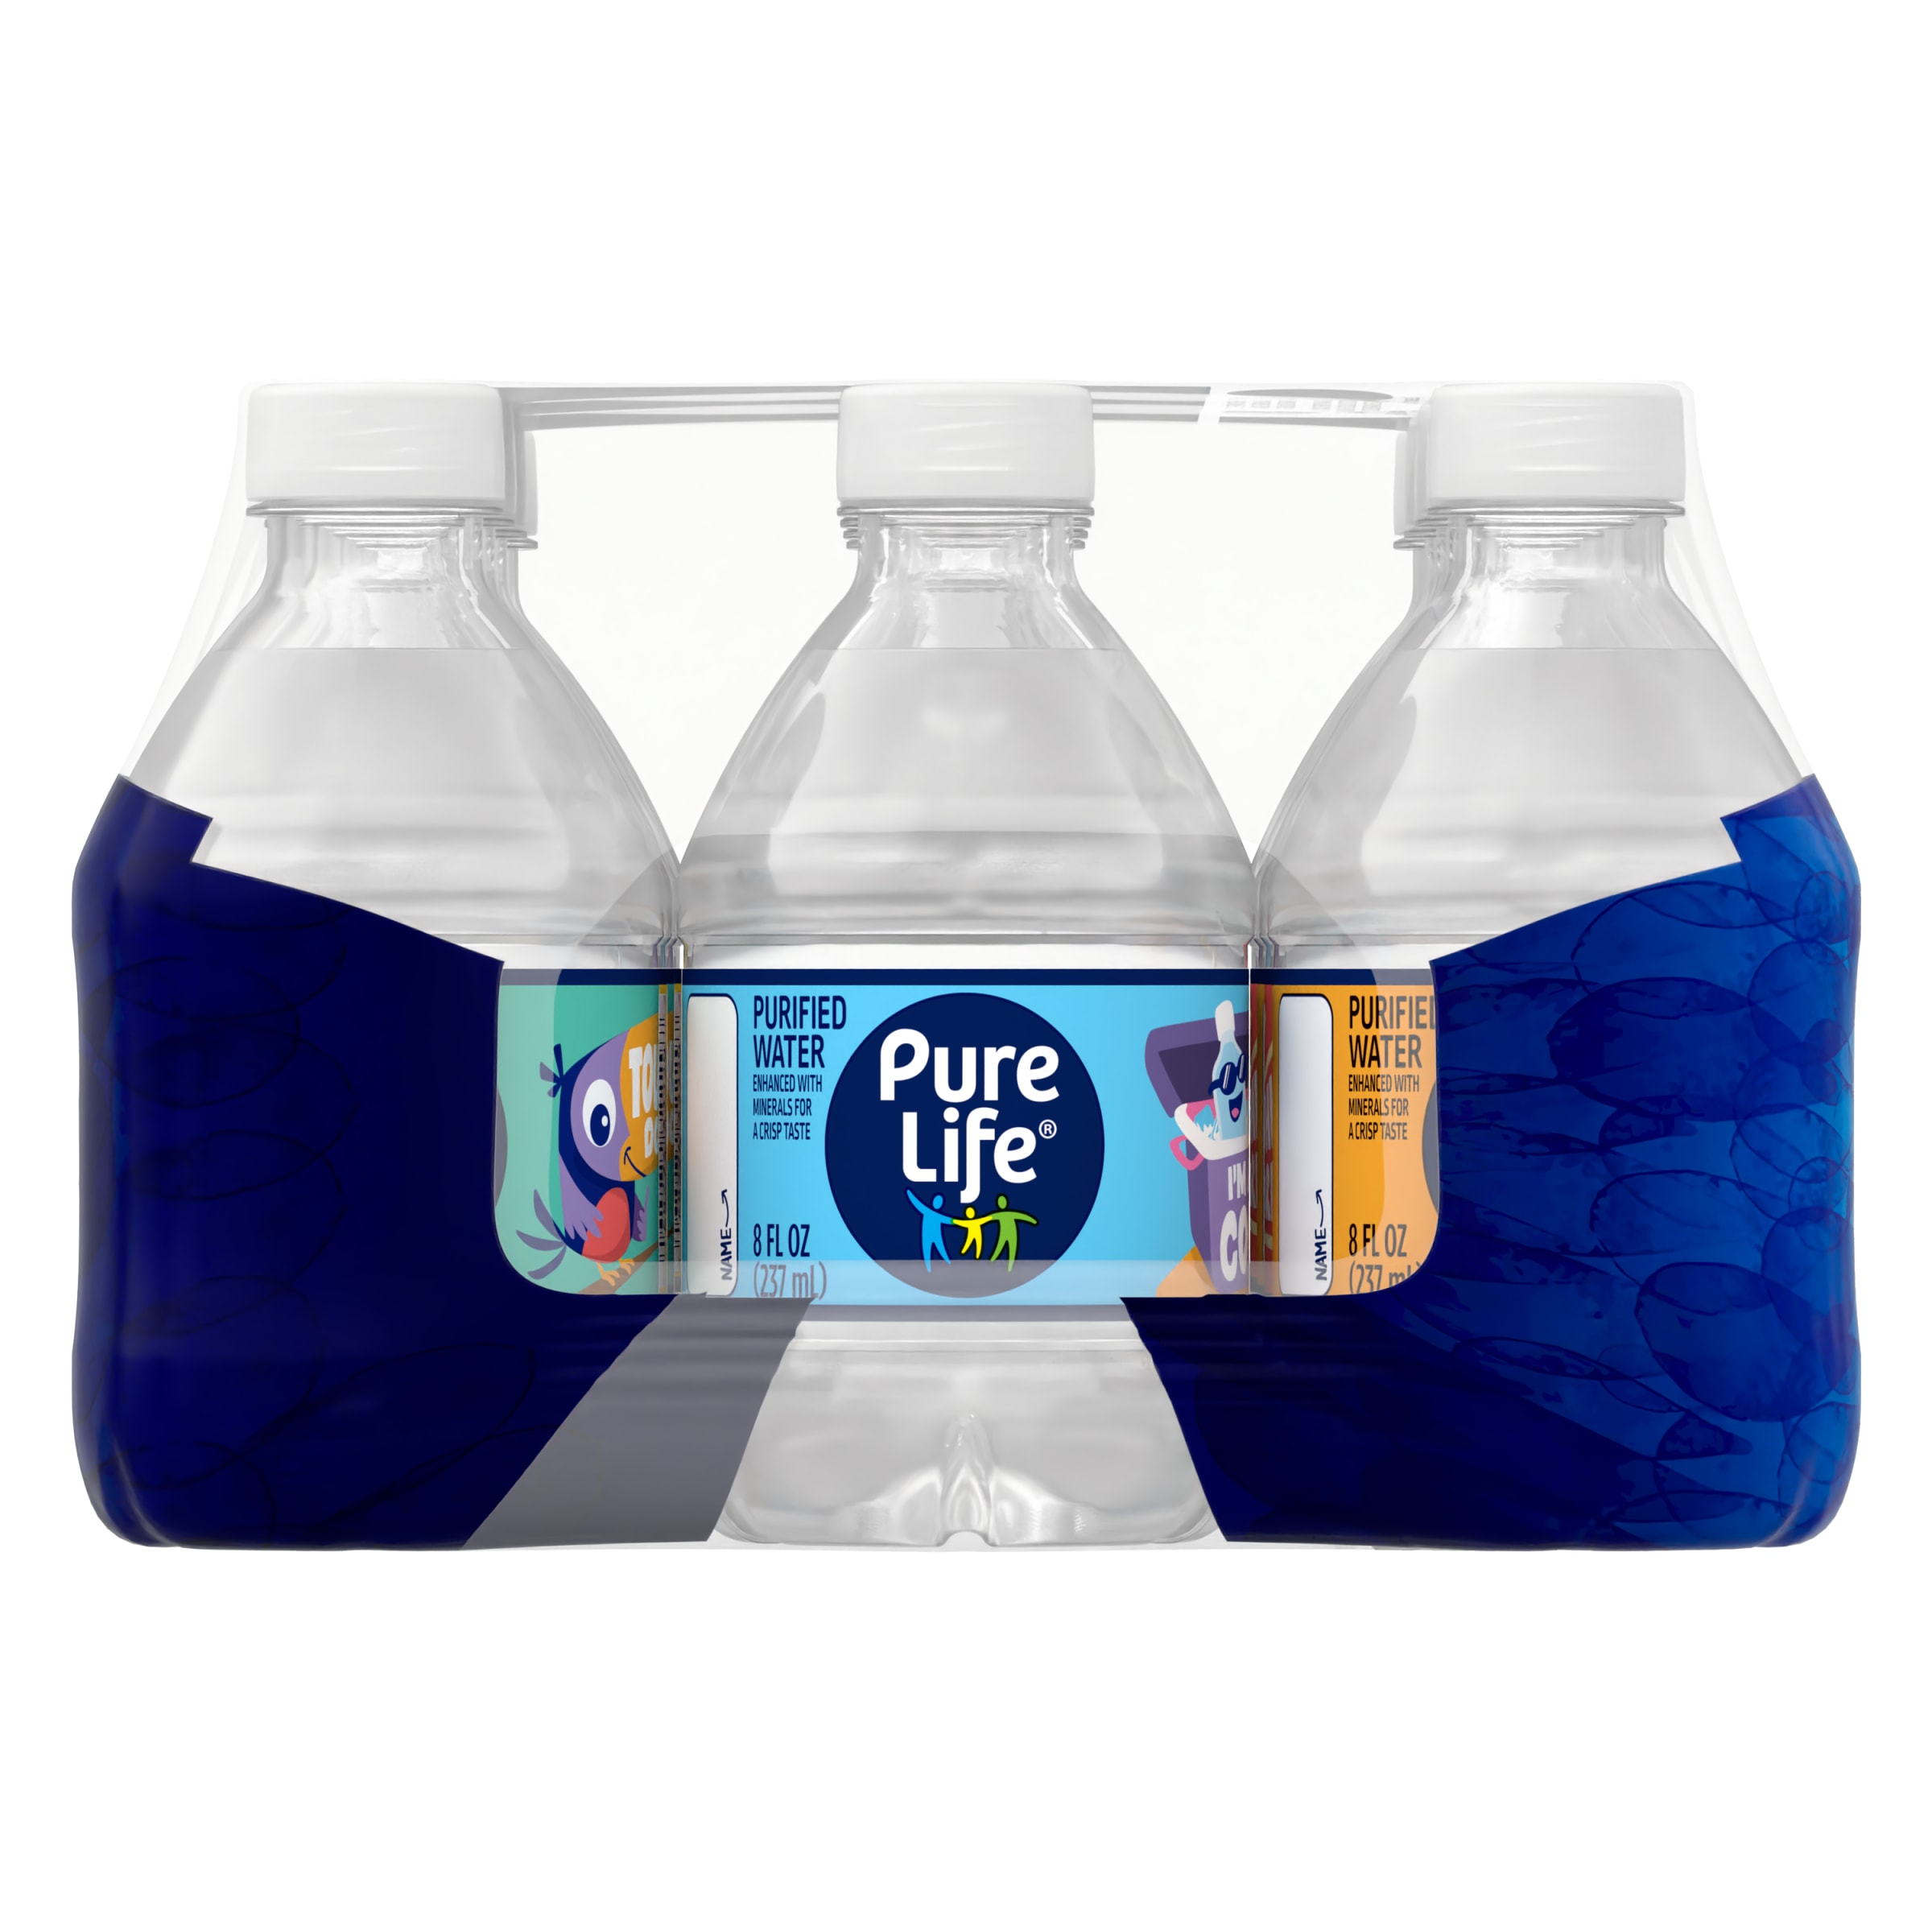 Pure Life Purified Water, 8 Fl Oz, Plastic Bottled Water (12 Pack) - image 7 of 10